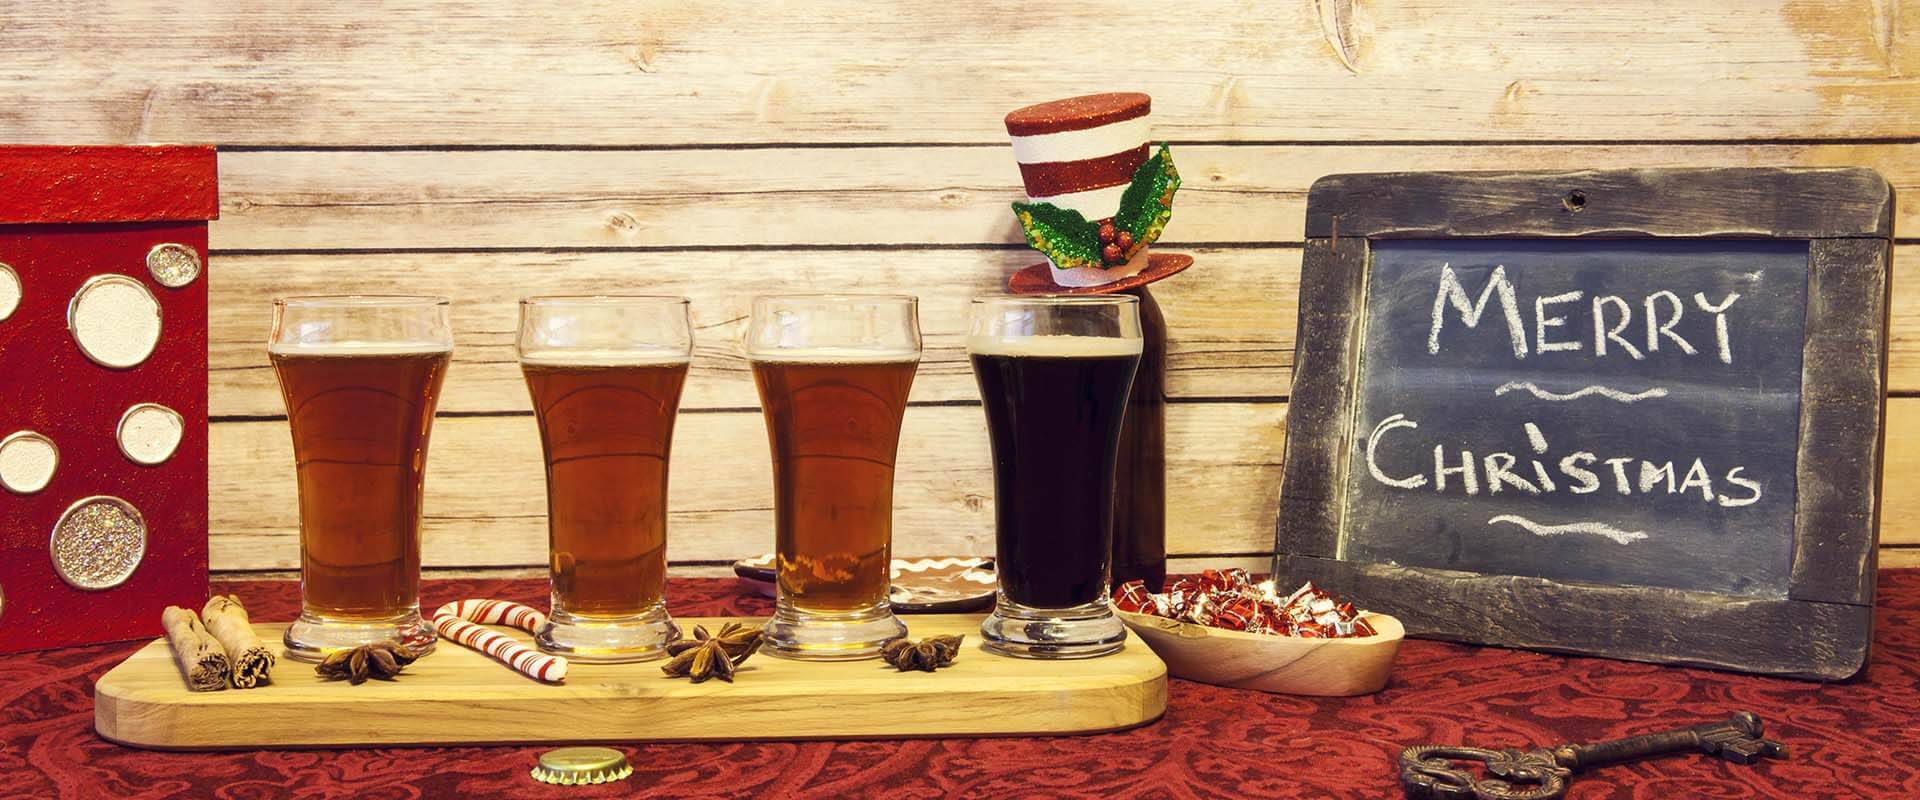 Christmas Gift Baskets with Beer